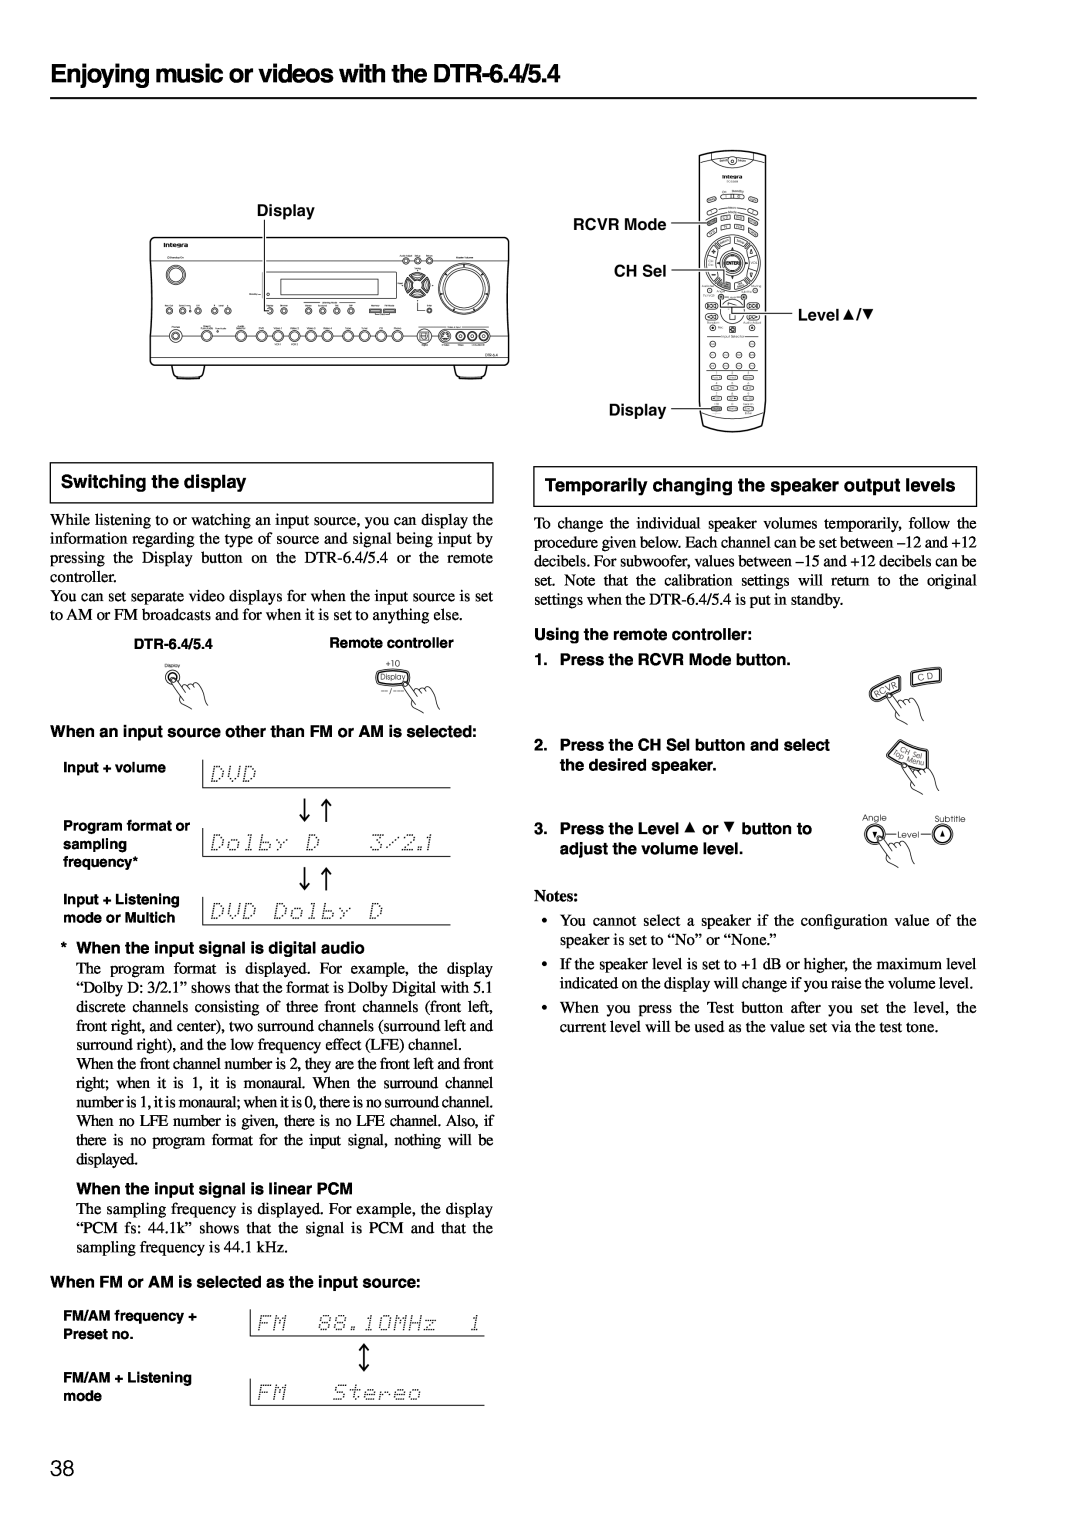 Integra DTR-6.4/5.4 instruction manual Switching the display, Temporarily changing the speaker output levels, Notes 